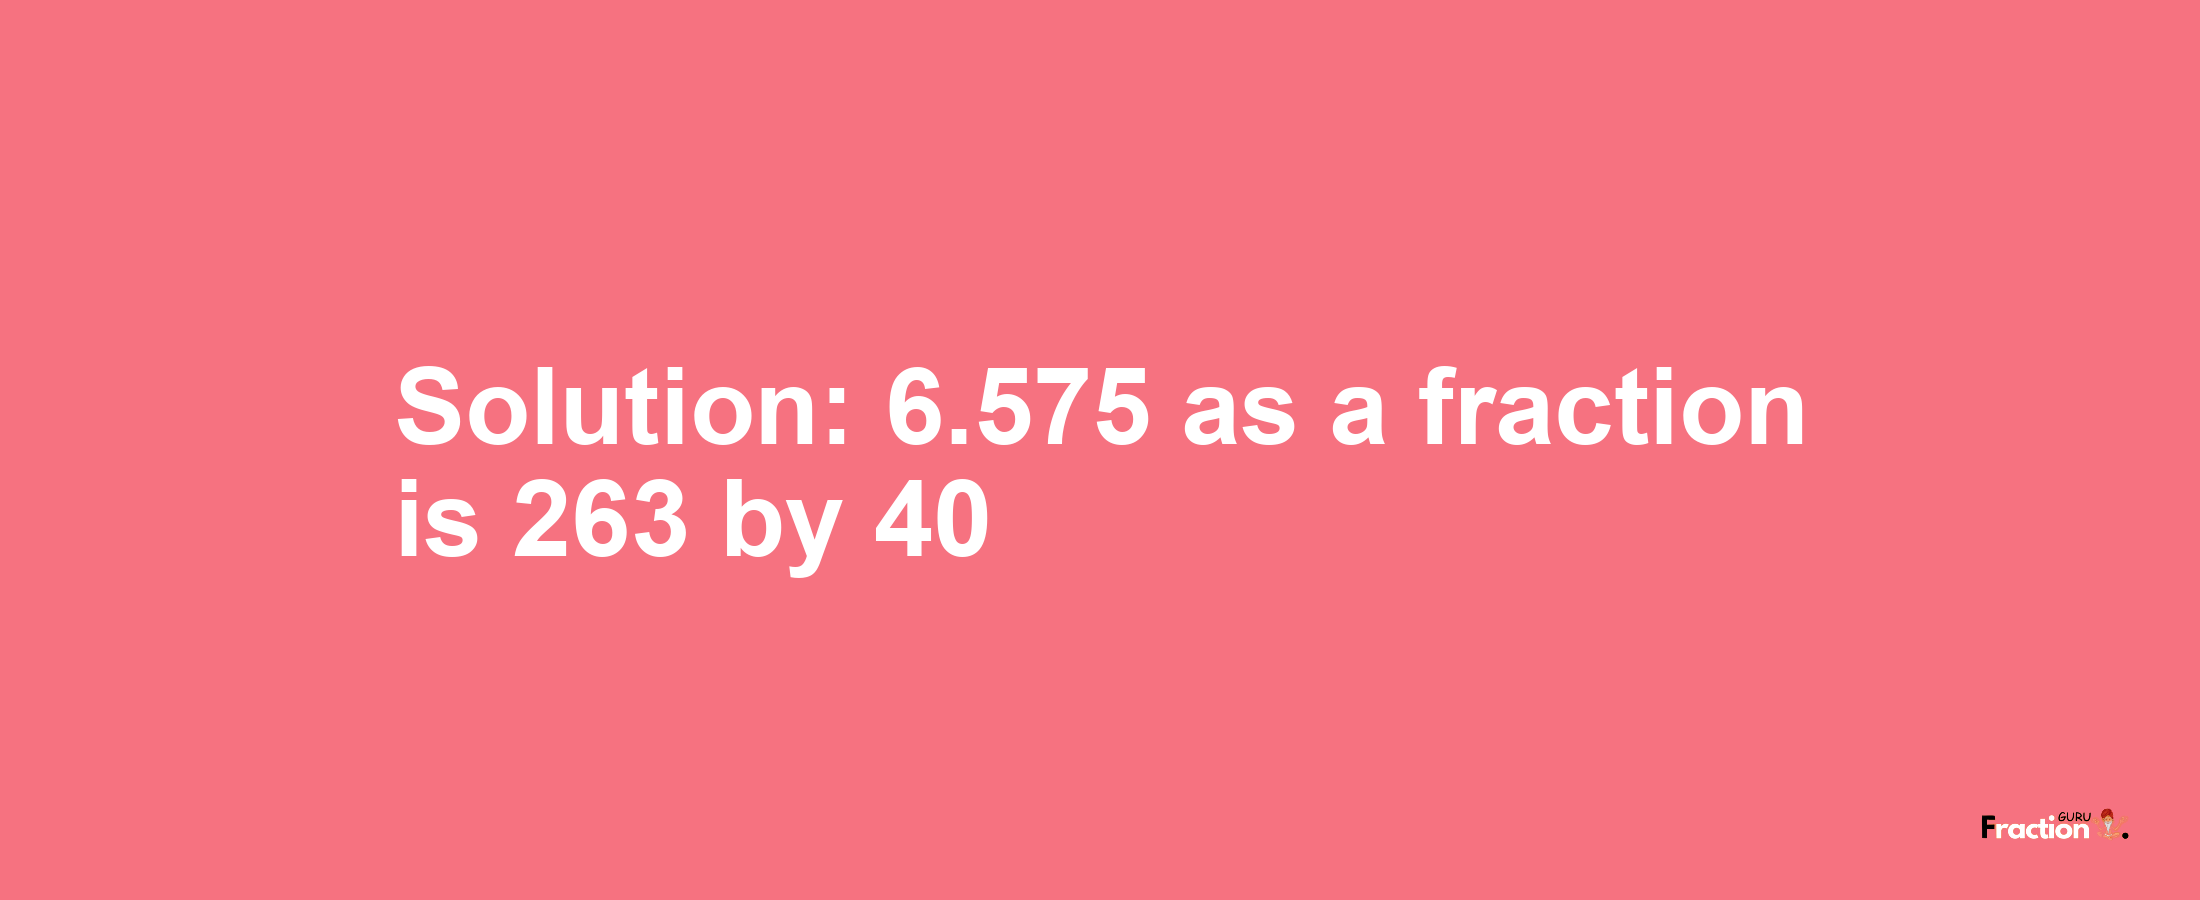 Solution:6.575 as a fraction is 263/40